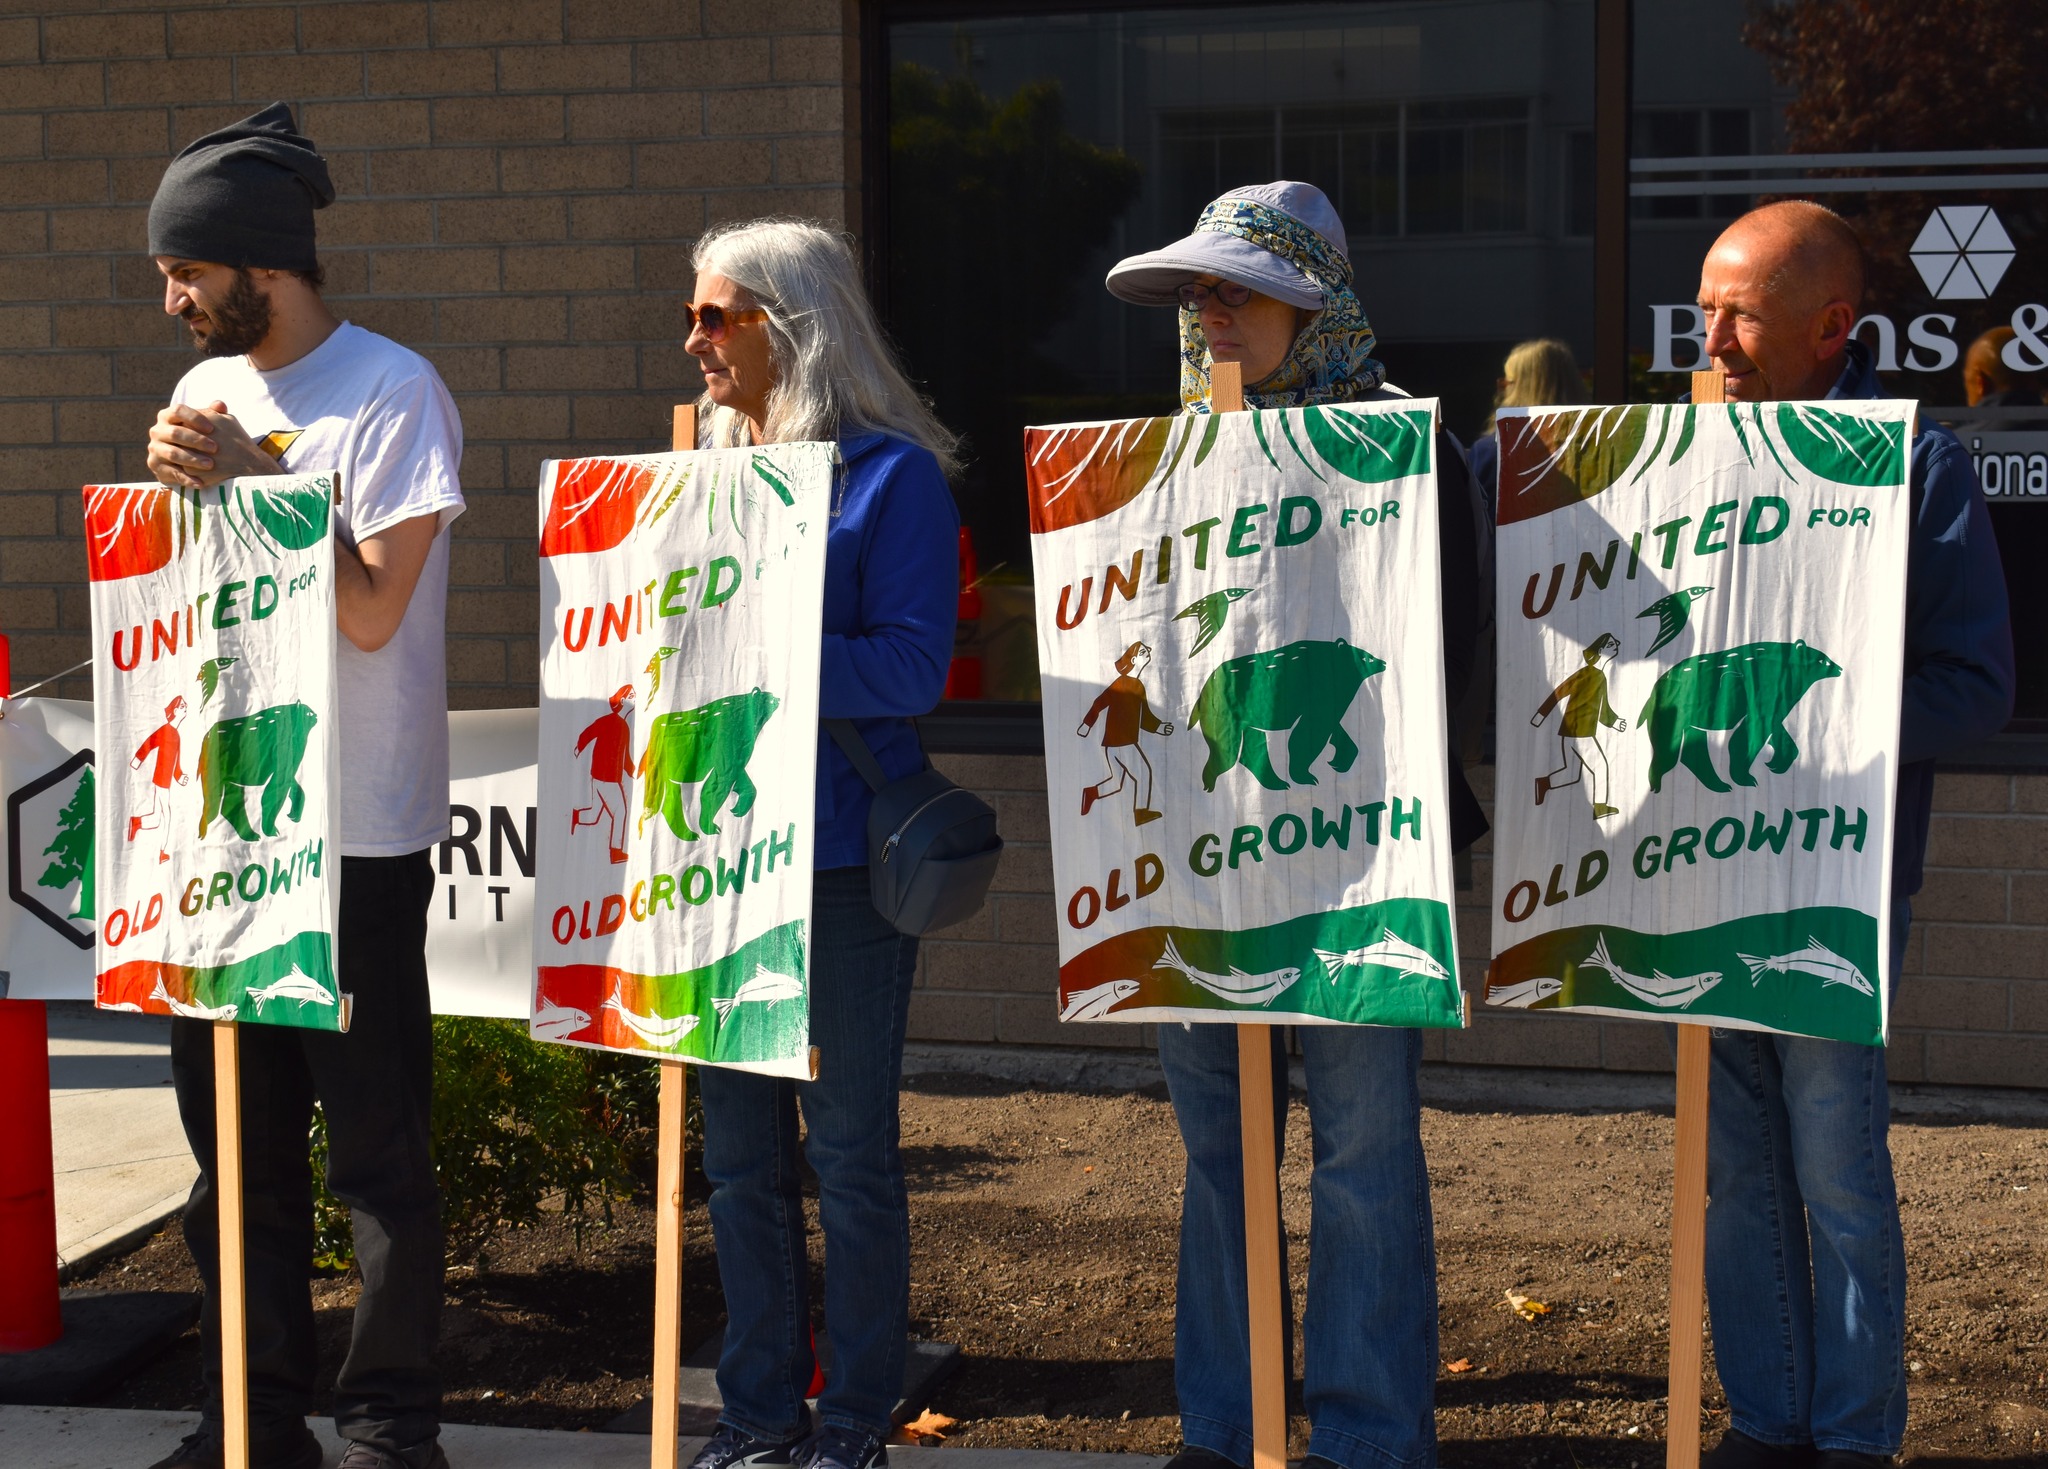 A group of people holding up signs in support of old-growth trees. End of image description.